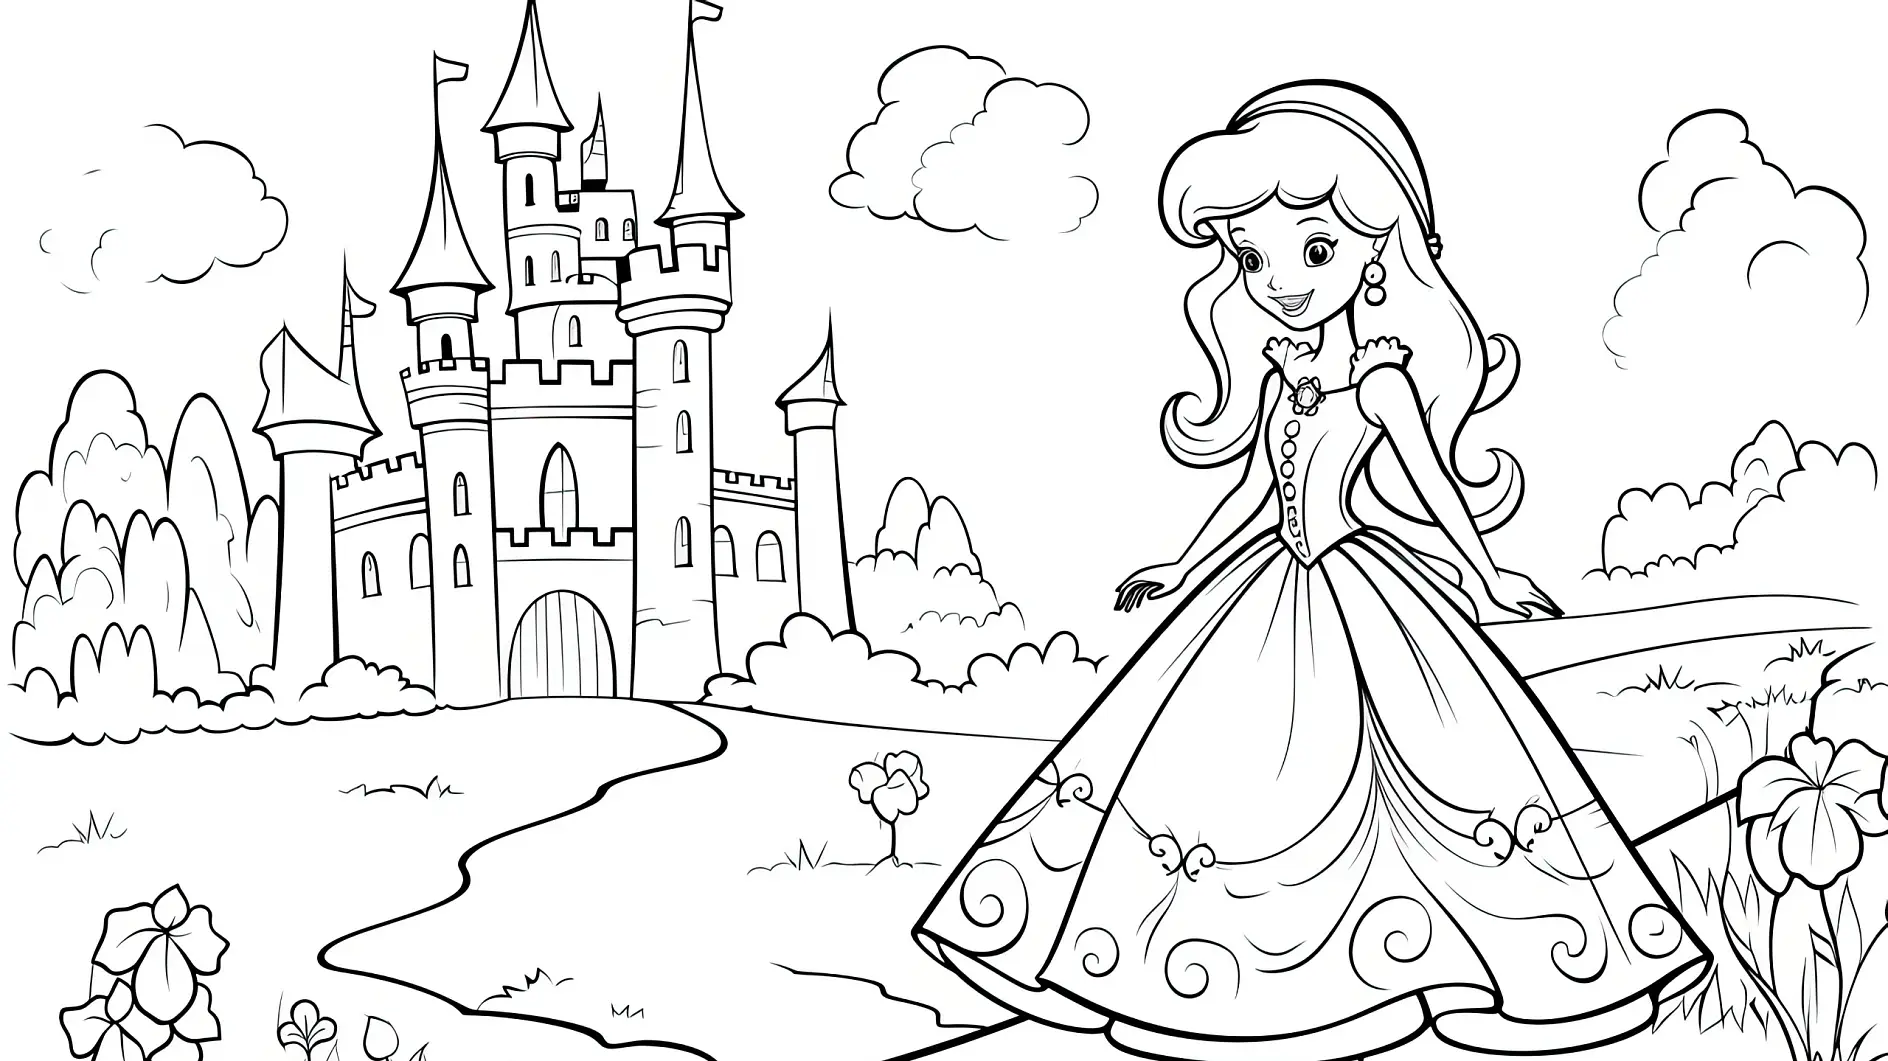 Bring the cartoon princess and castle to life by coloring their intricate line art. designe